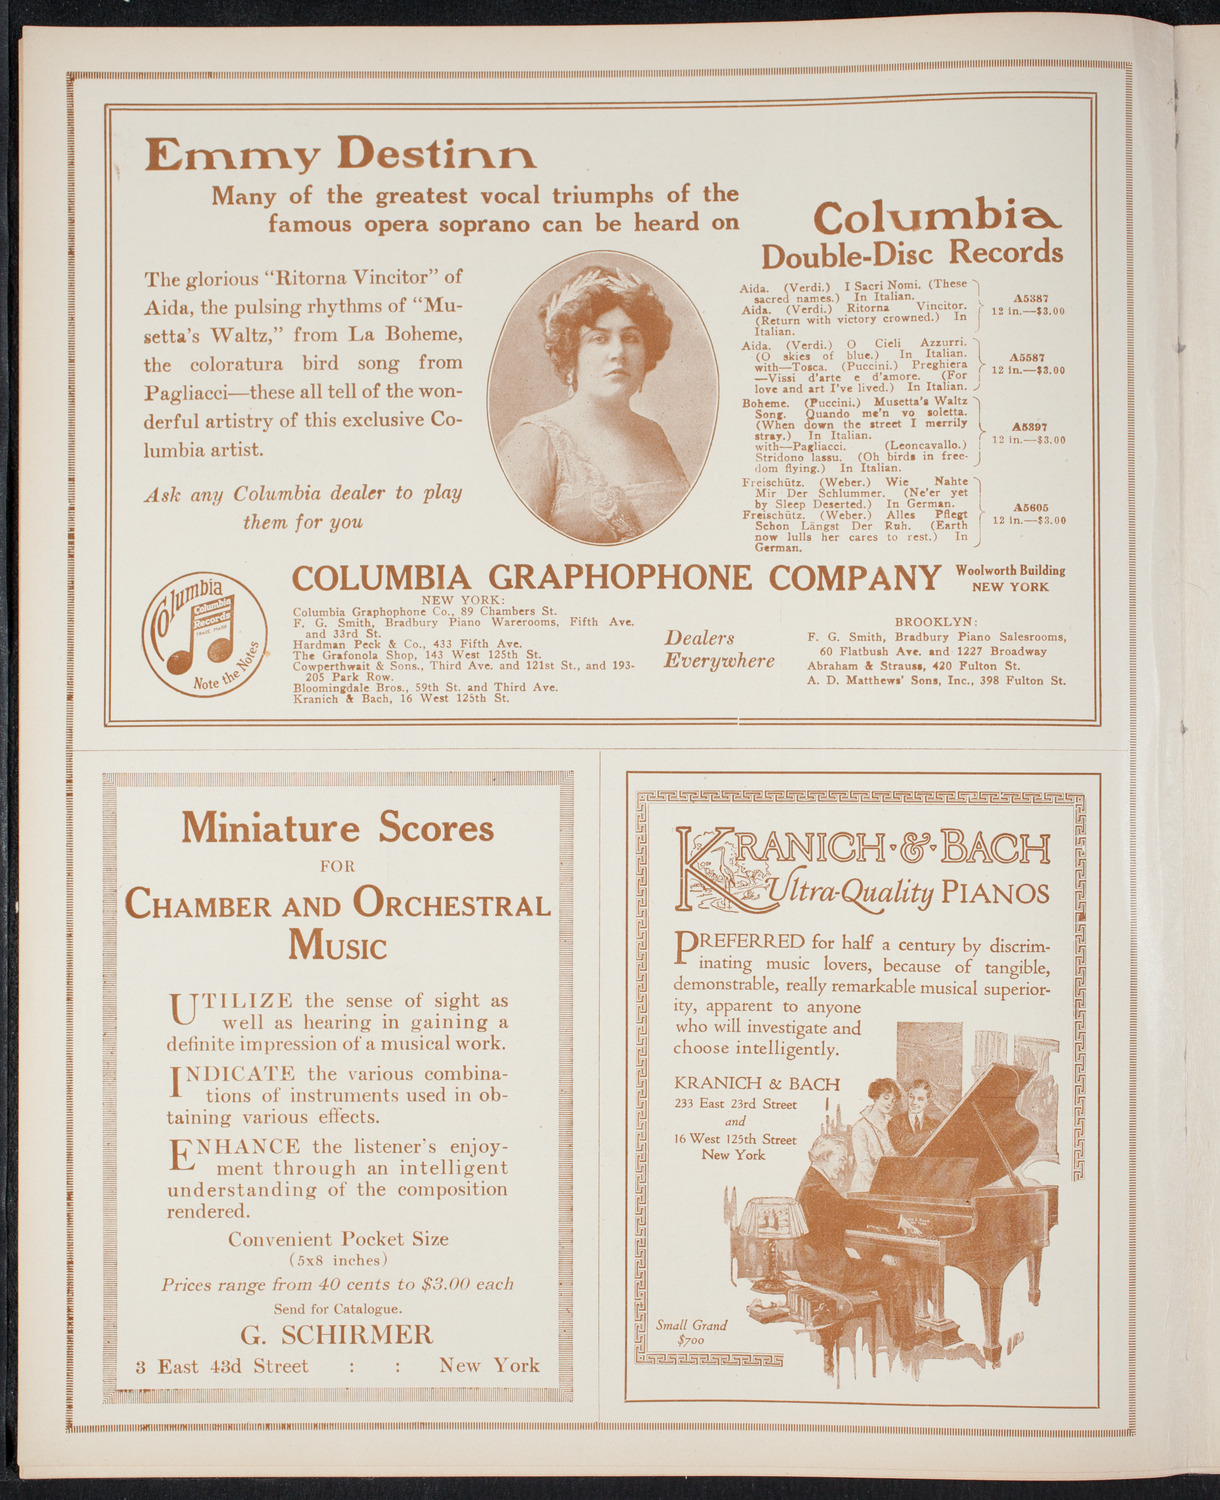 Roy Chandler's South American Series: Spring Byington-Chandler "A Trip to the Argentine", November 24, 1915, program page 6